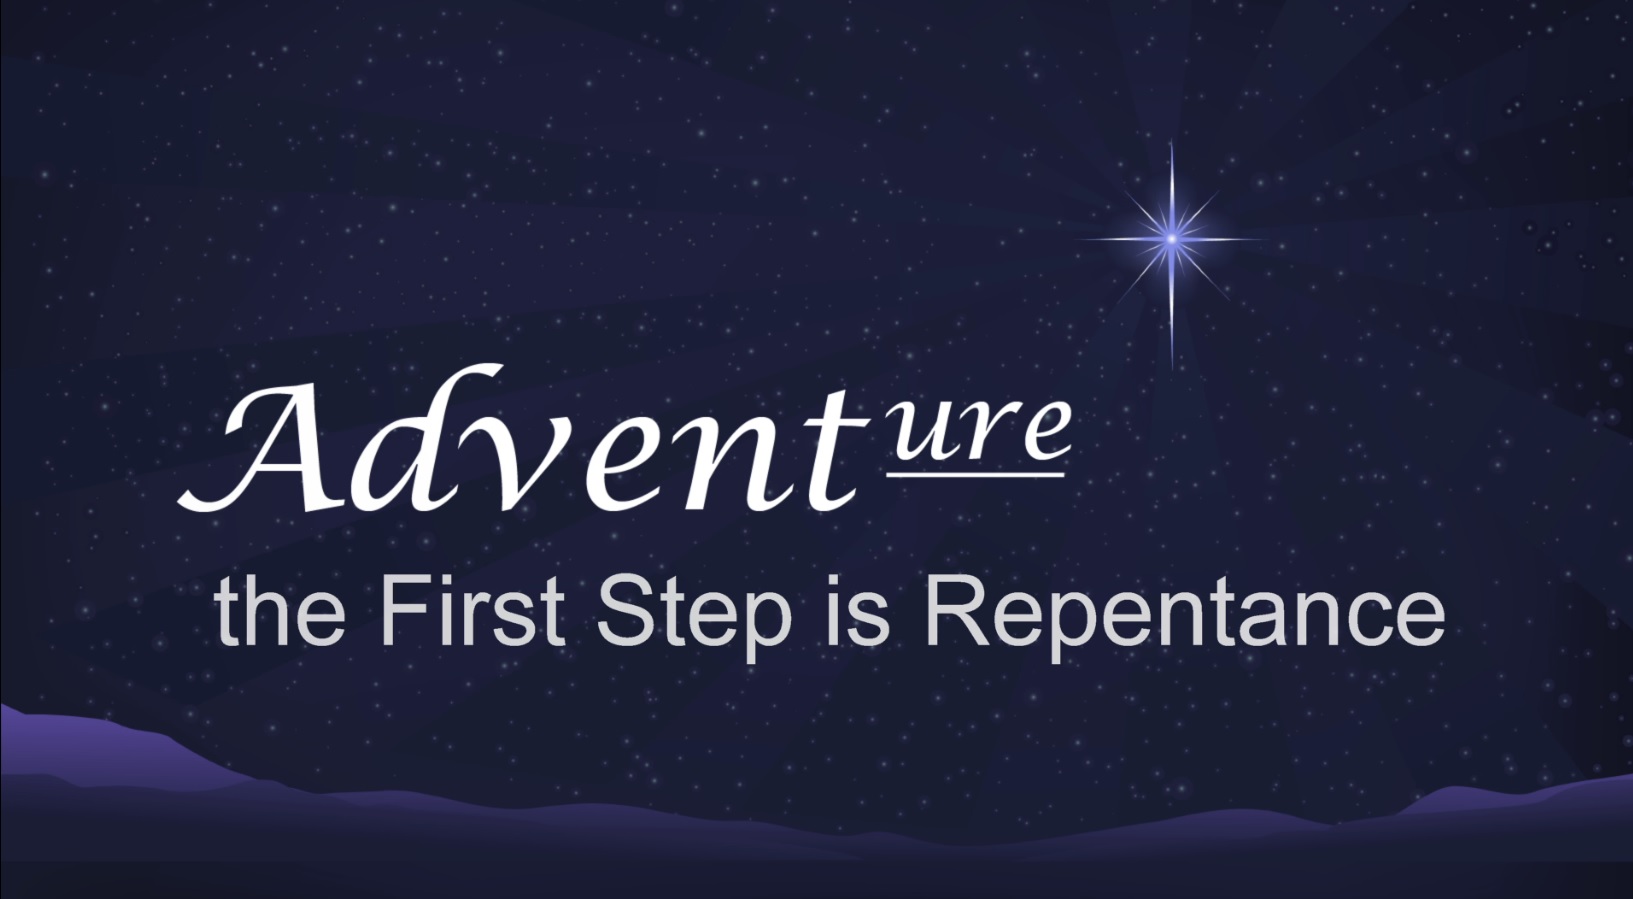 Advent: The First Step is Repentance